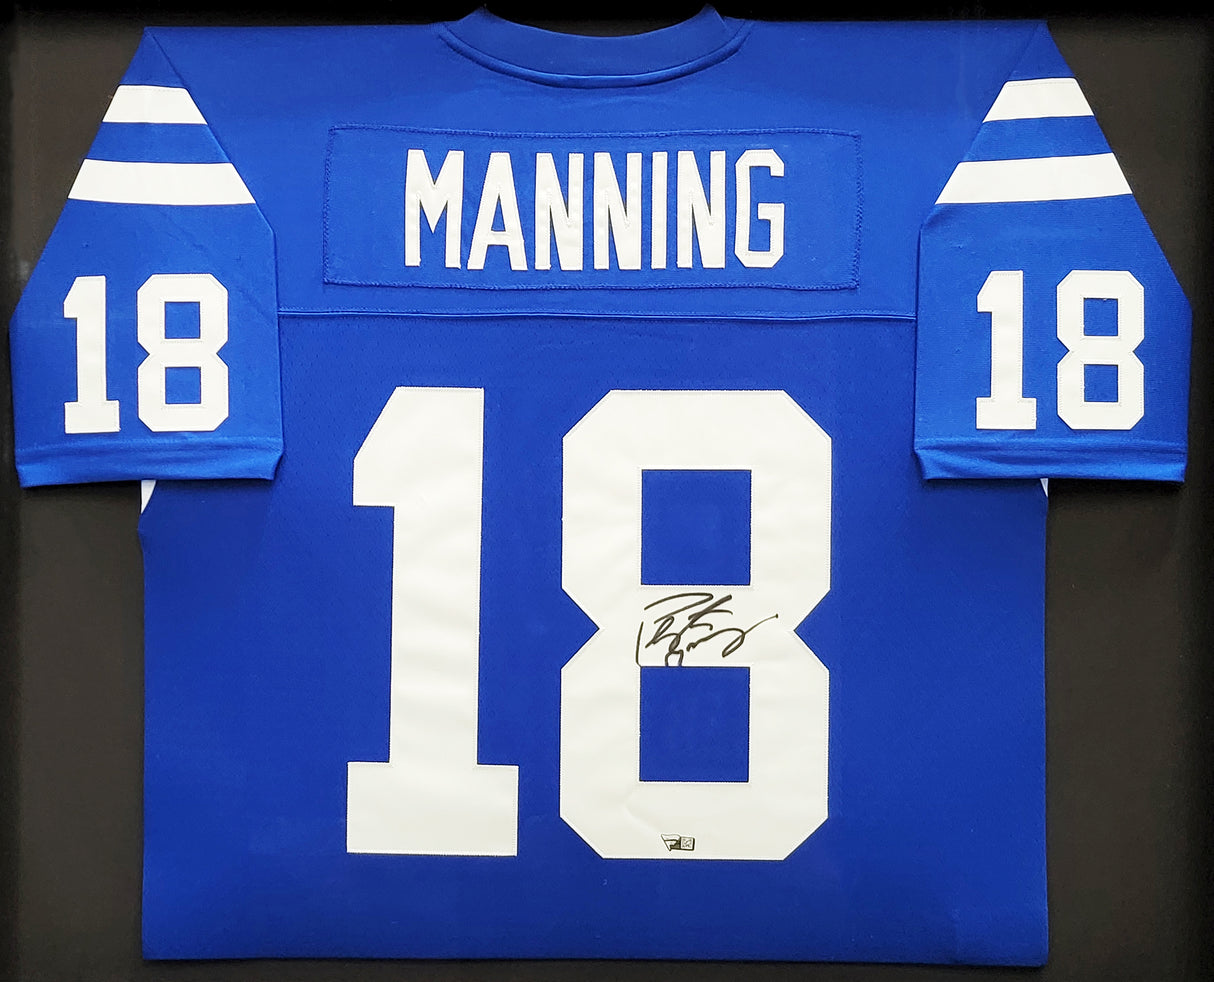 Indianapolis Colts Peyton Manning Autographed Framed Blue Authentic Mitchell & Ness Replica 1998 Throwback Jersey Fanatics Holo Stock #203487